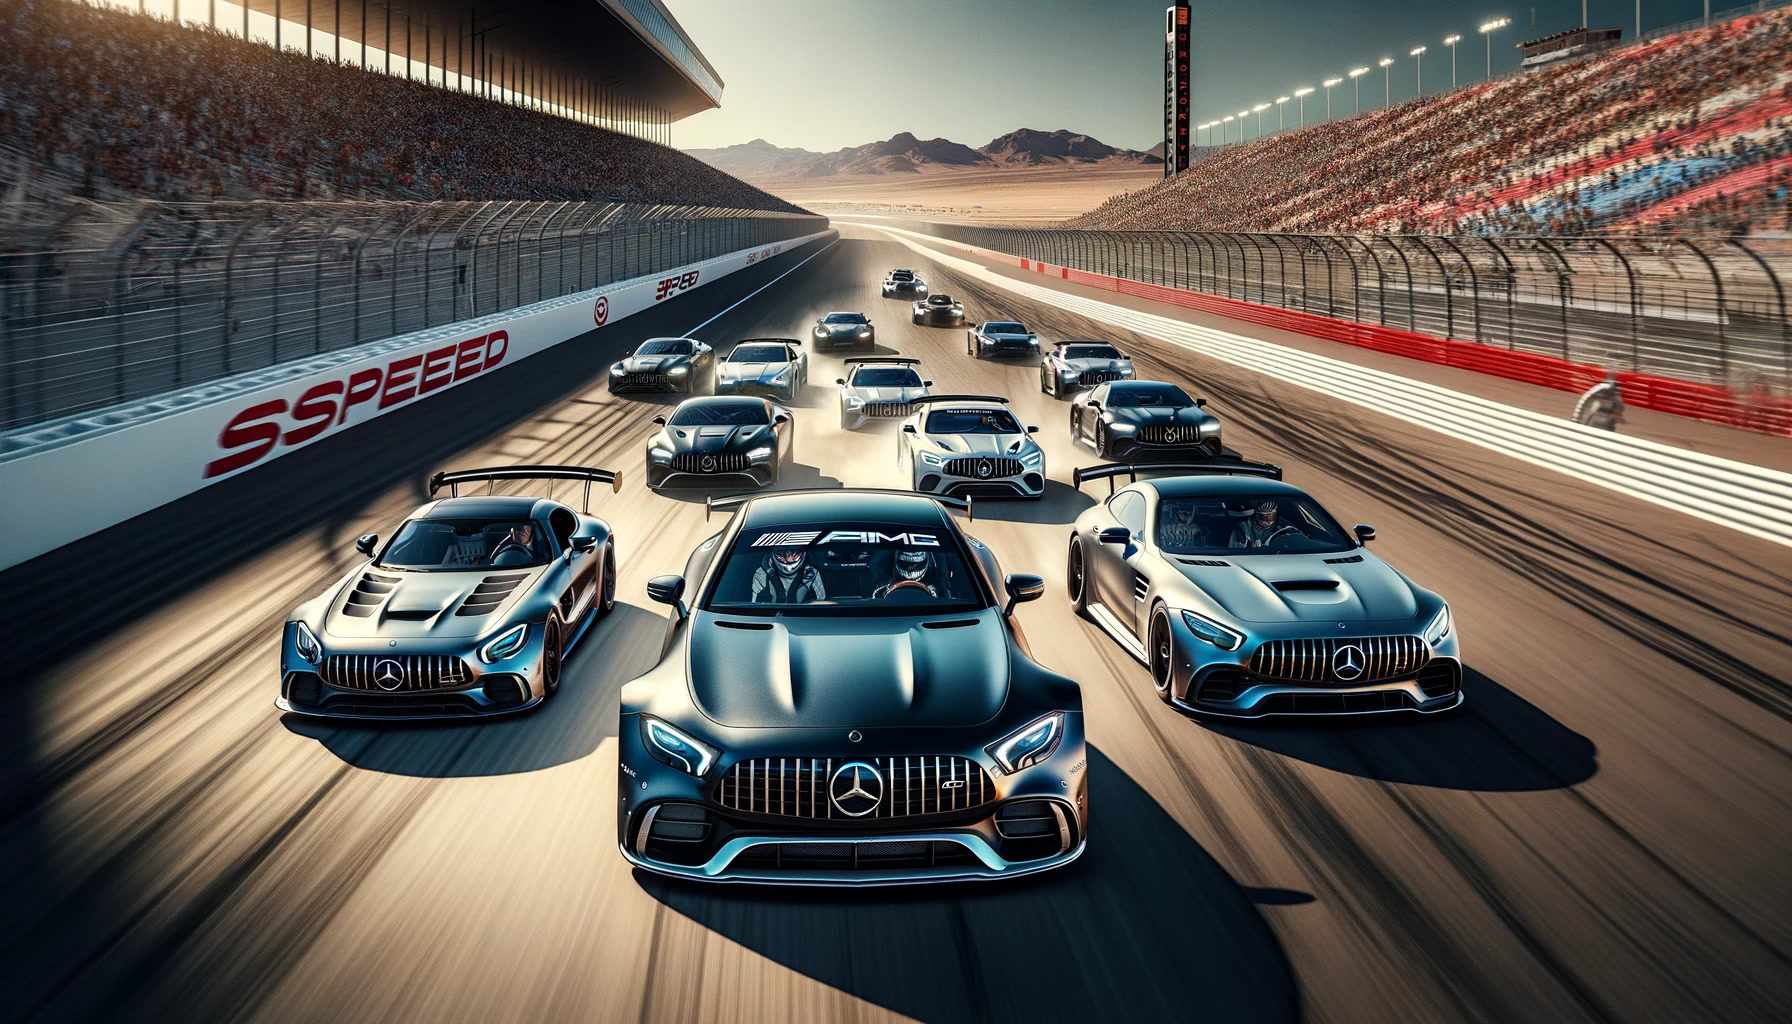 Mercedes AMG Performance Vehicles on Track at Speed Vegas